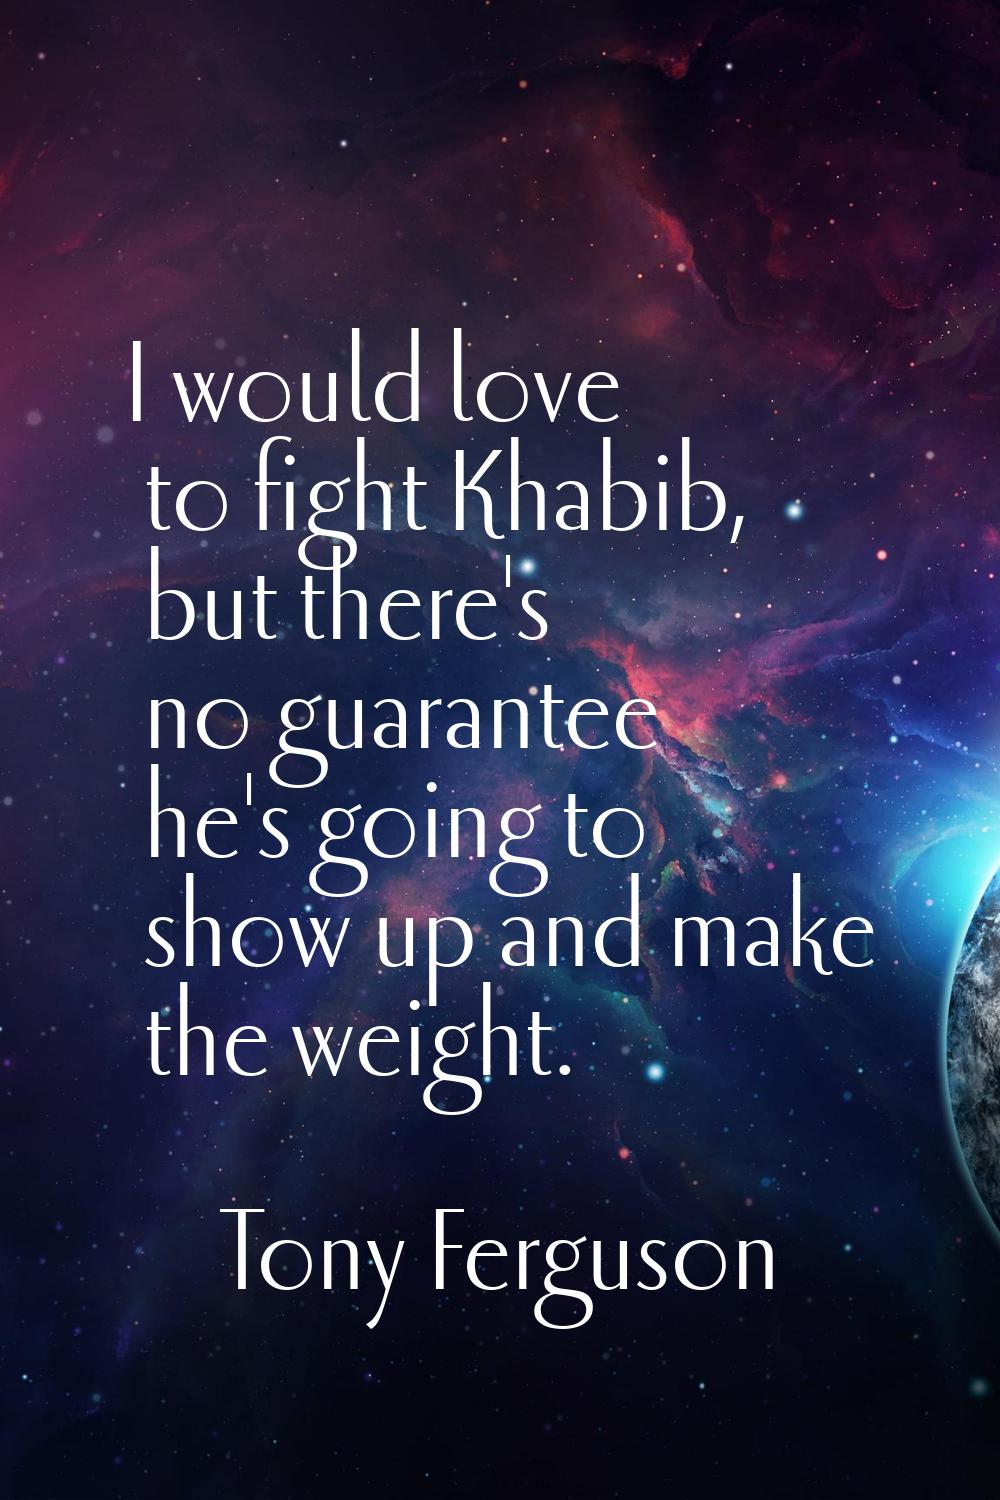 I would love to fight Khabib, but there's no guarantee he's going to show up and make the weight.